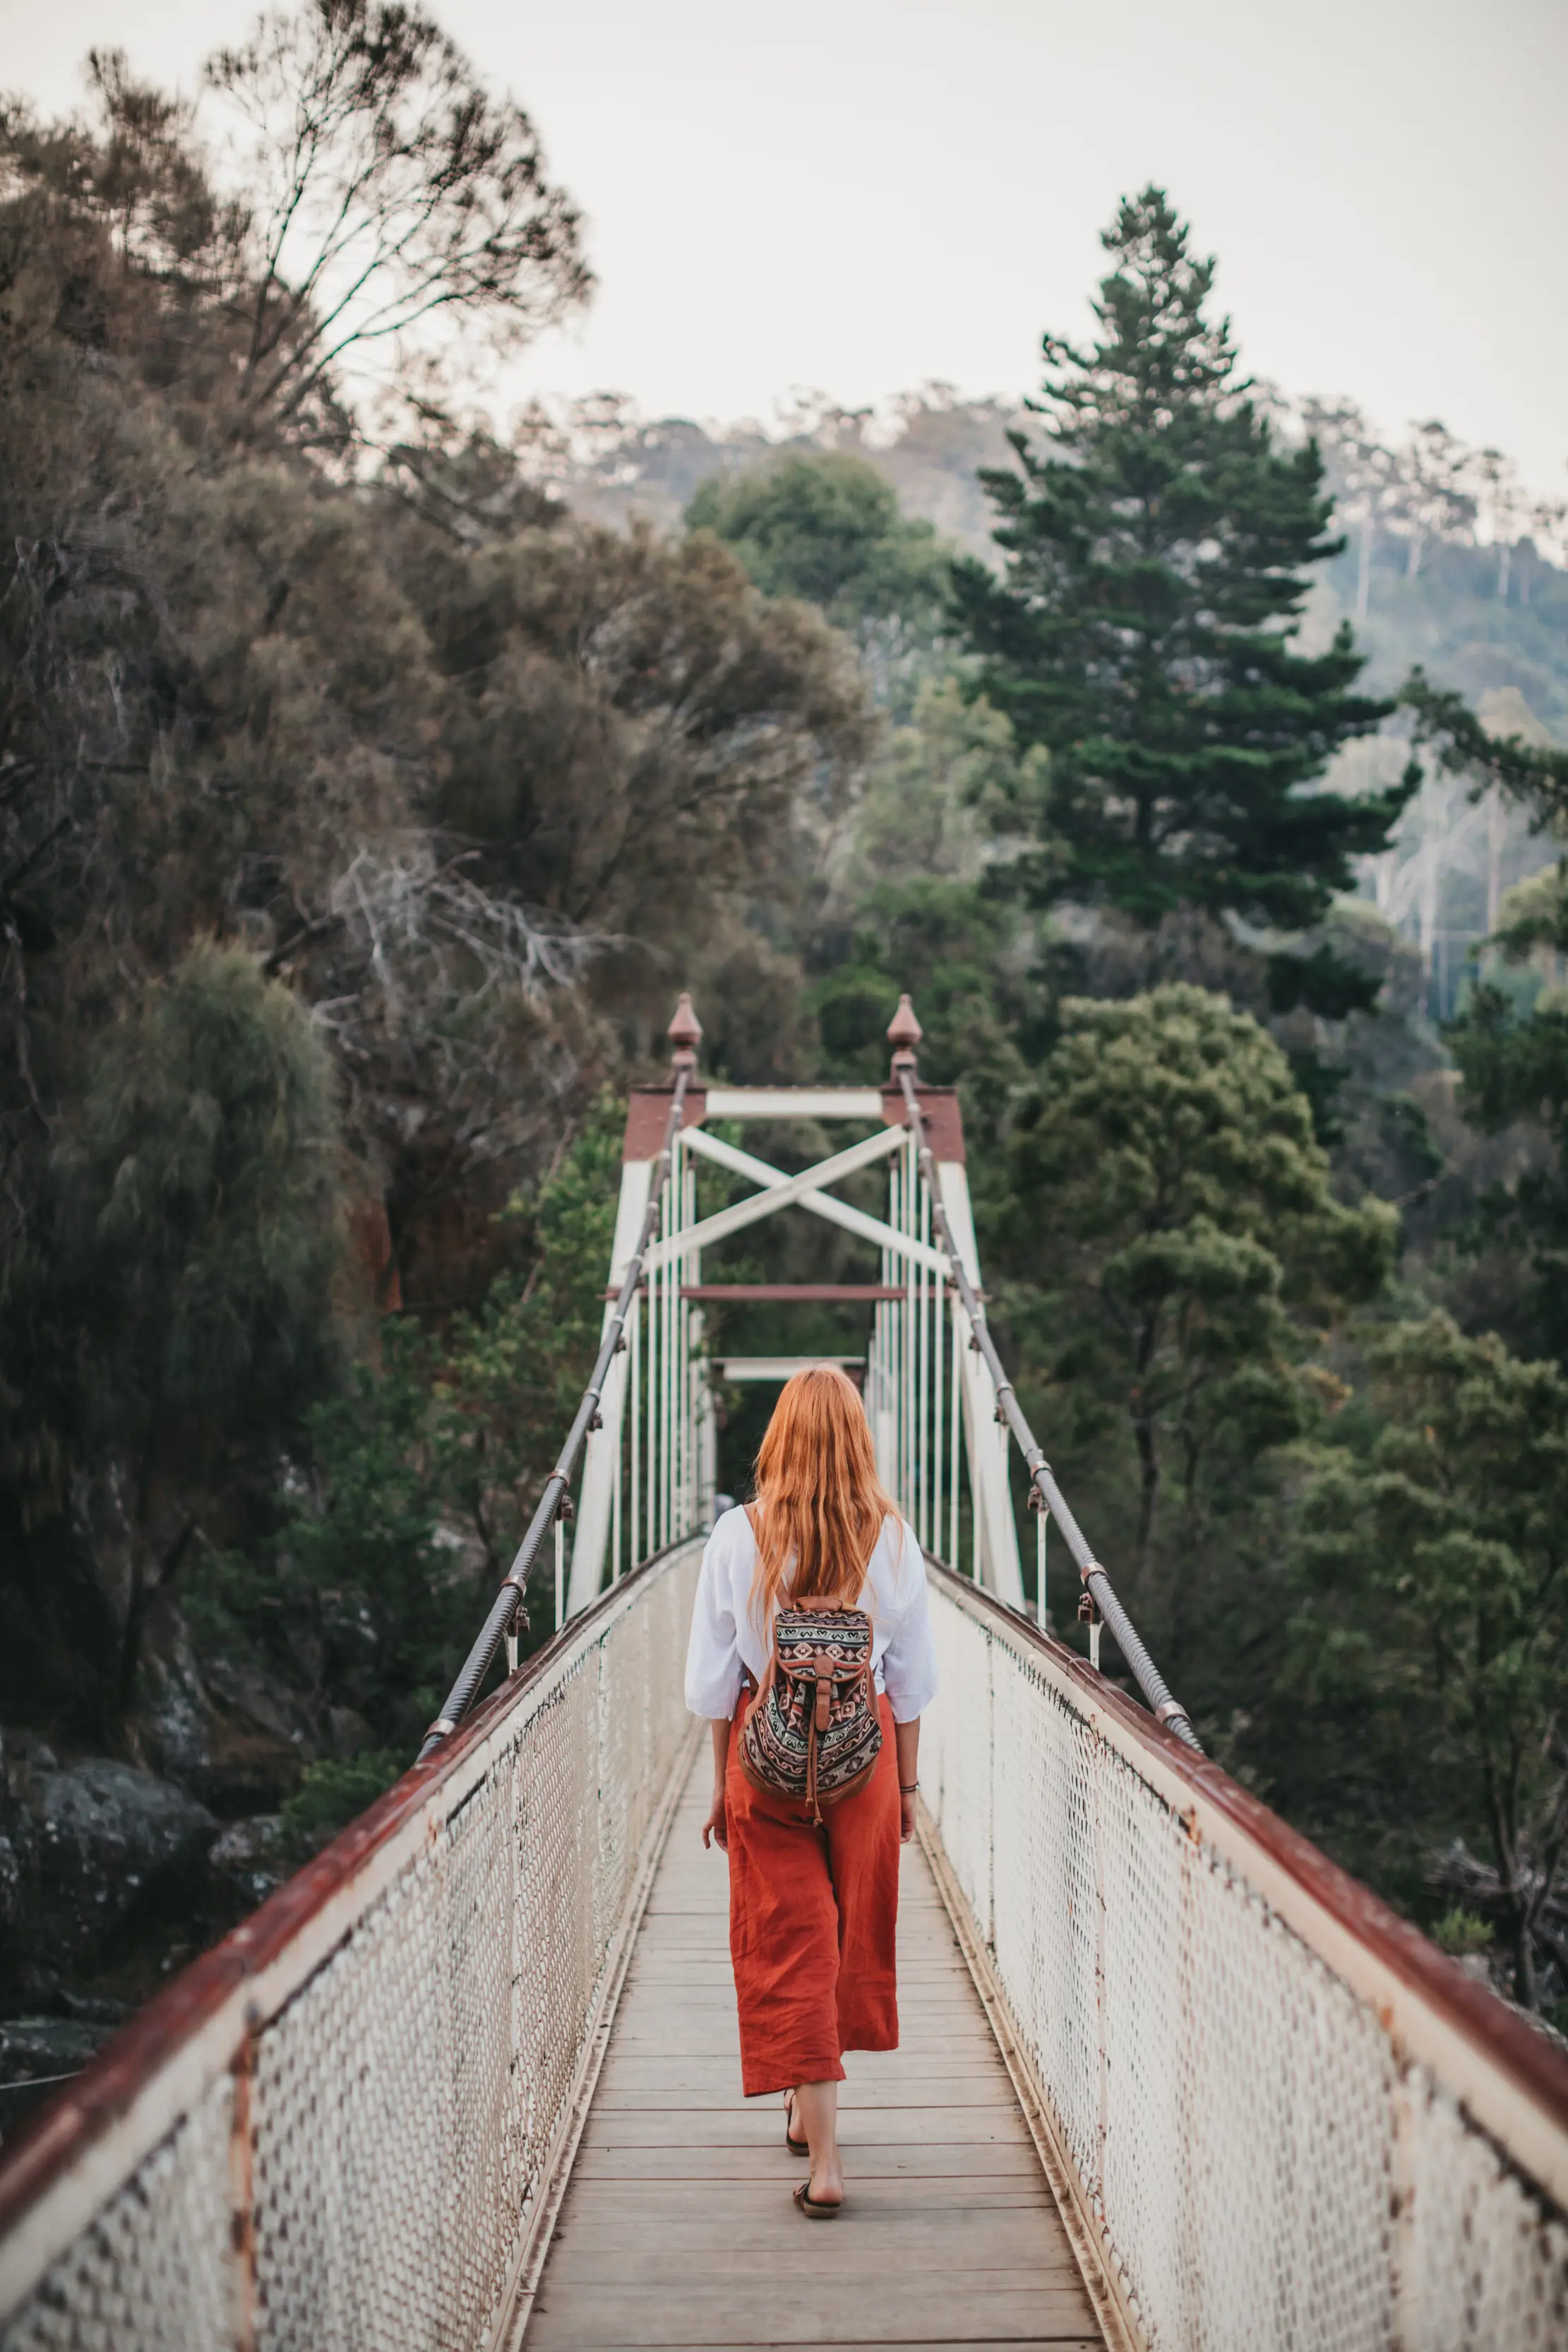 A woman with red hair walks across the Suspension bridge at Cataract Gorge Reserve. There is mist over the surrounding rainforest.